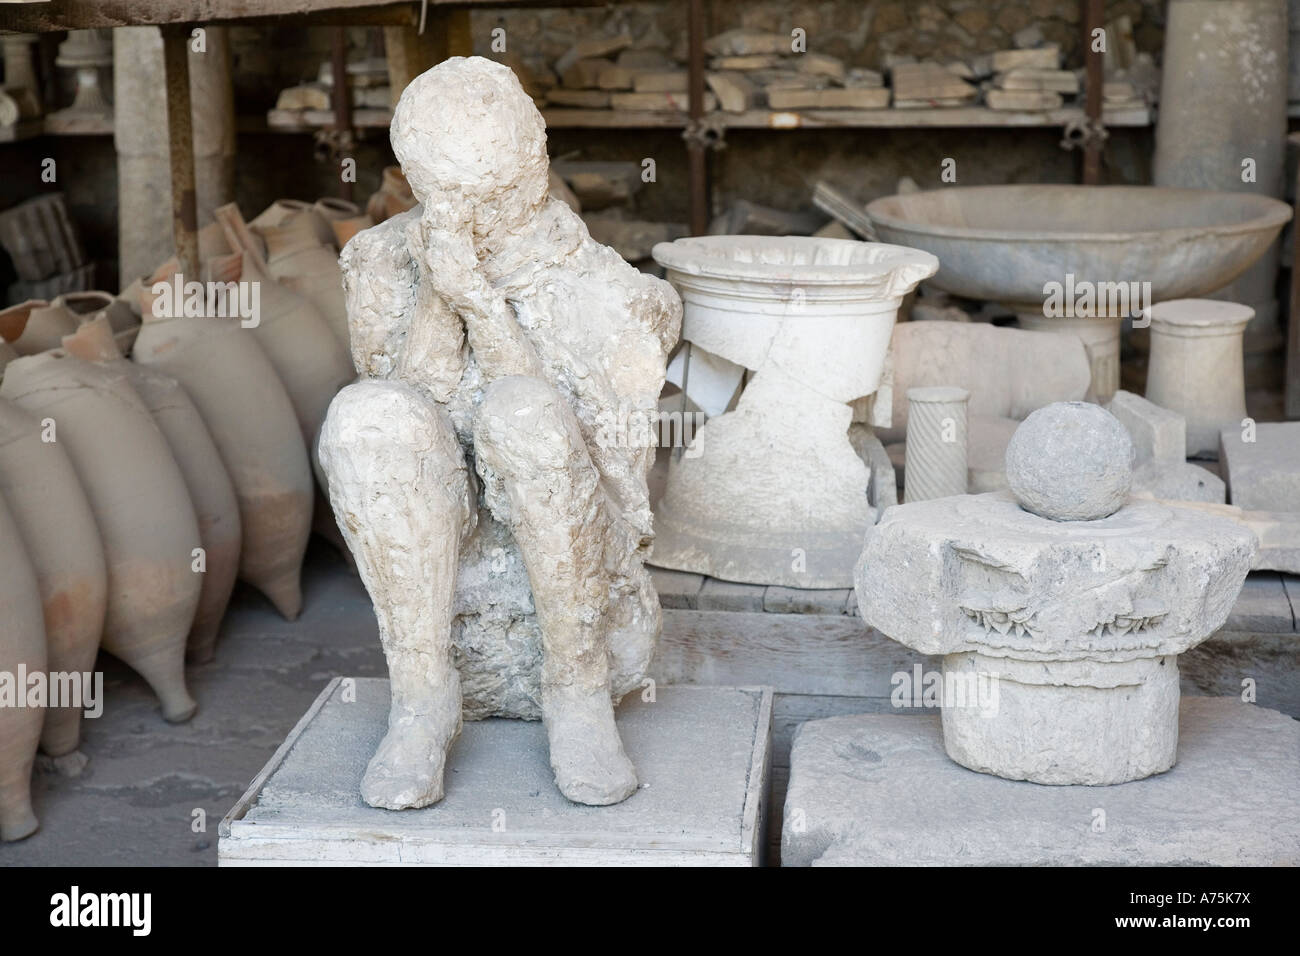 Pompeii, Campania, Italy; artifacts recovered during excavation including a cast of a human body. Stock Photo